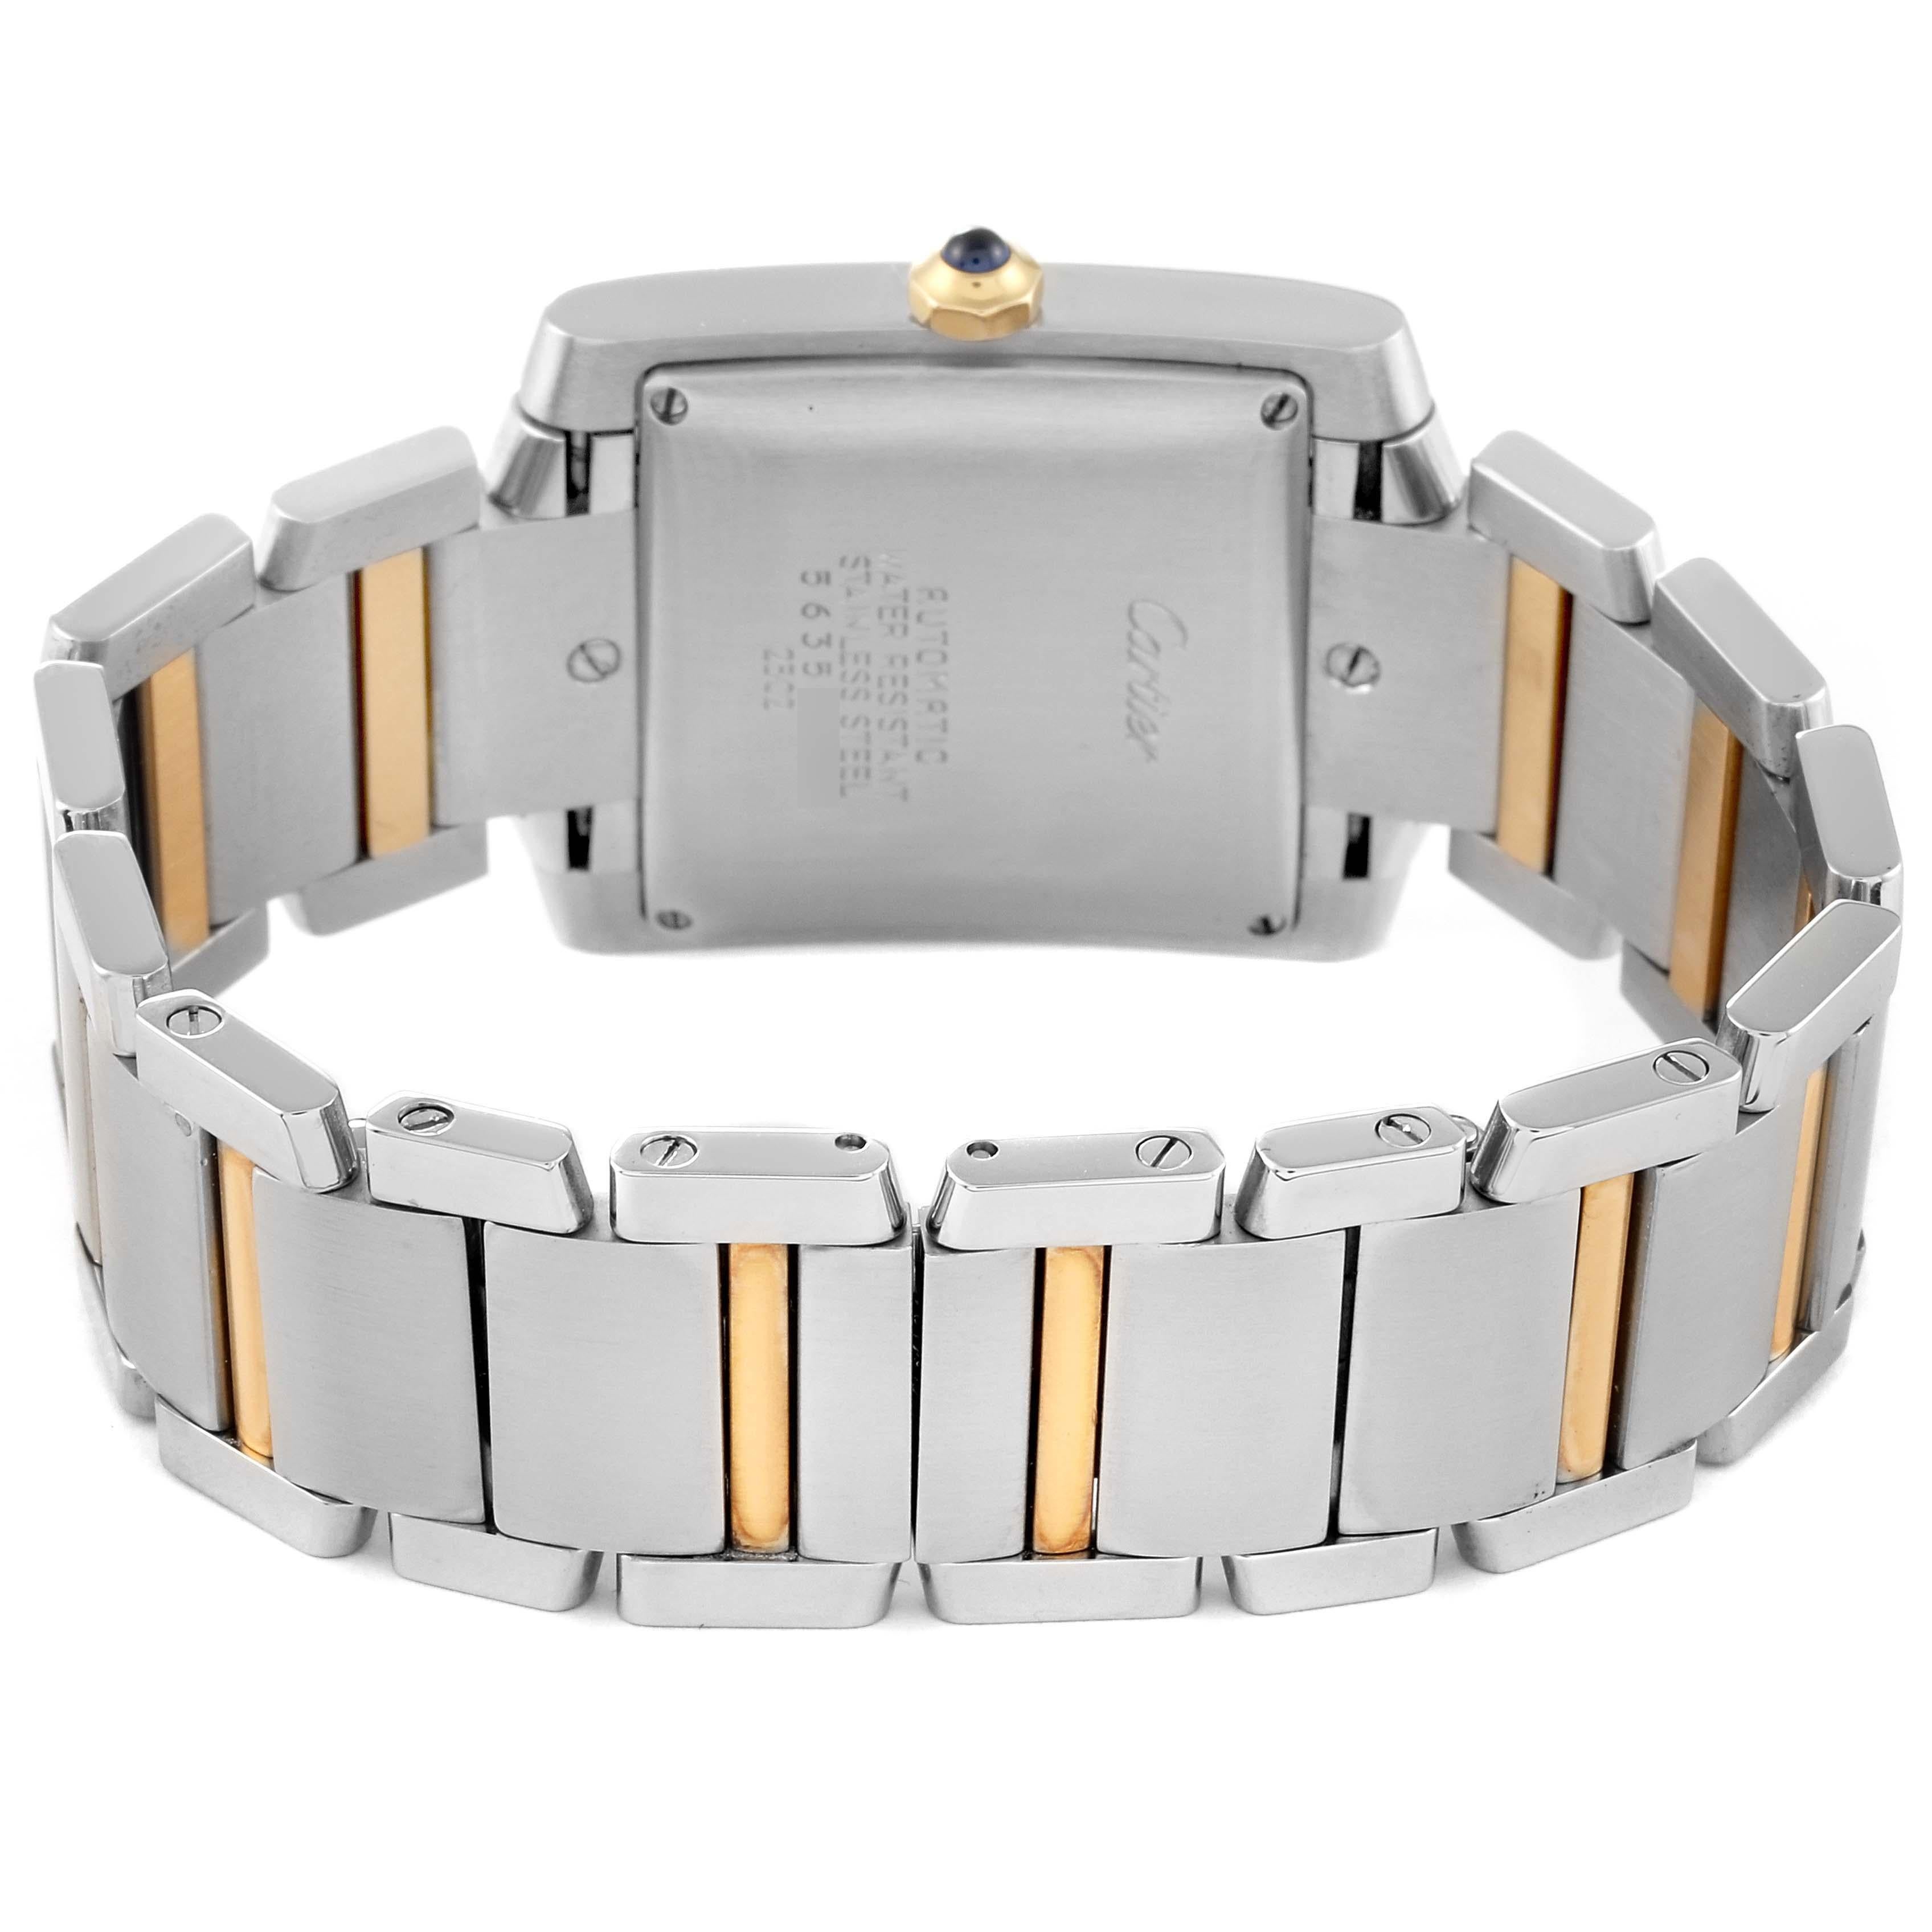 Cartier Tank Francaise Steel Yellow Gold Silver Dial Mens Watch W51005Q4 3